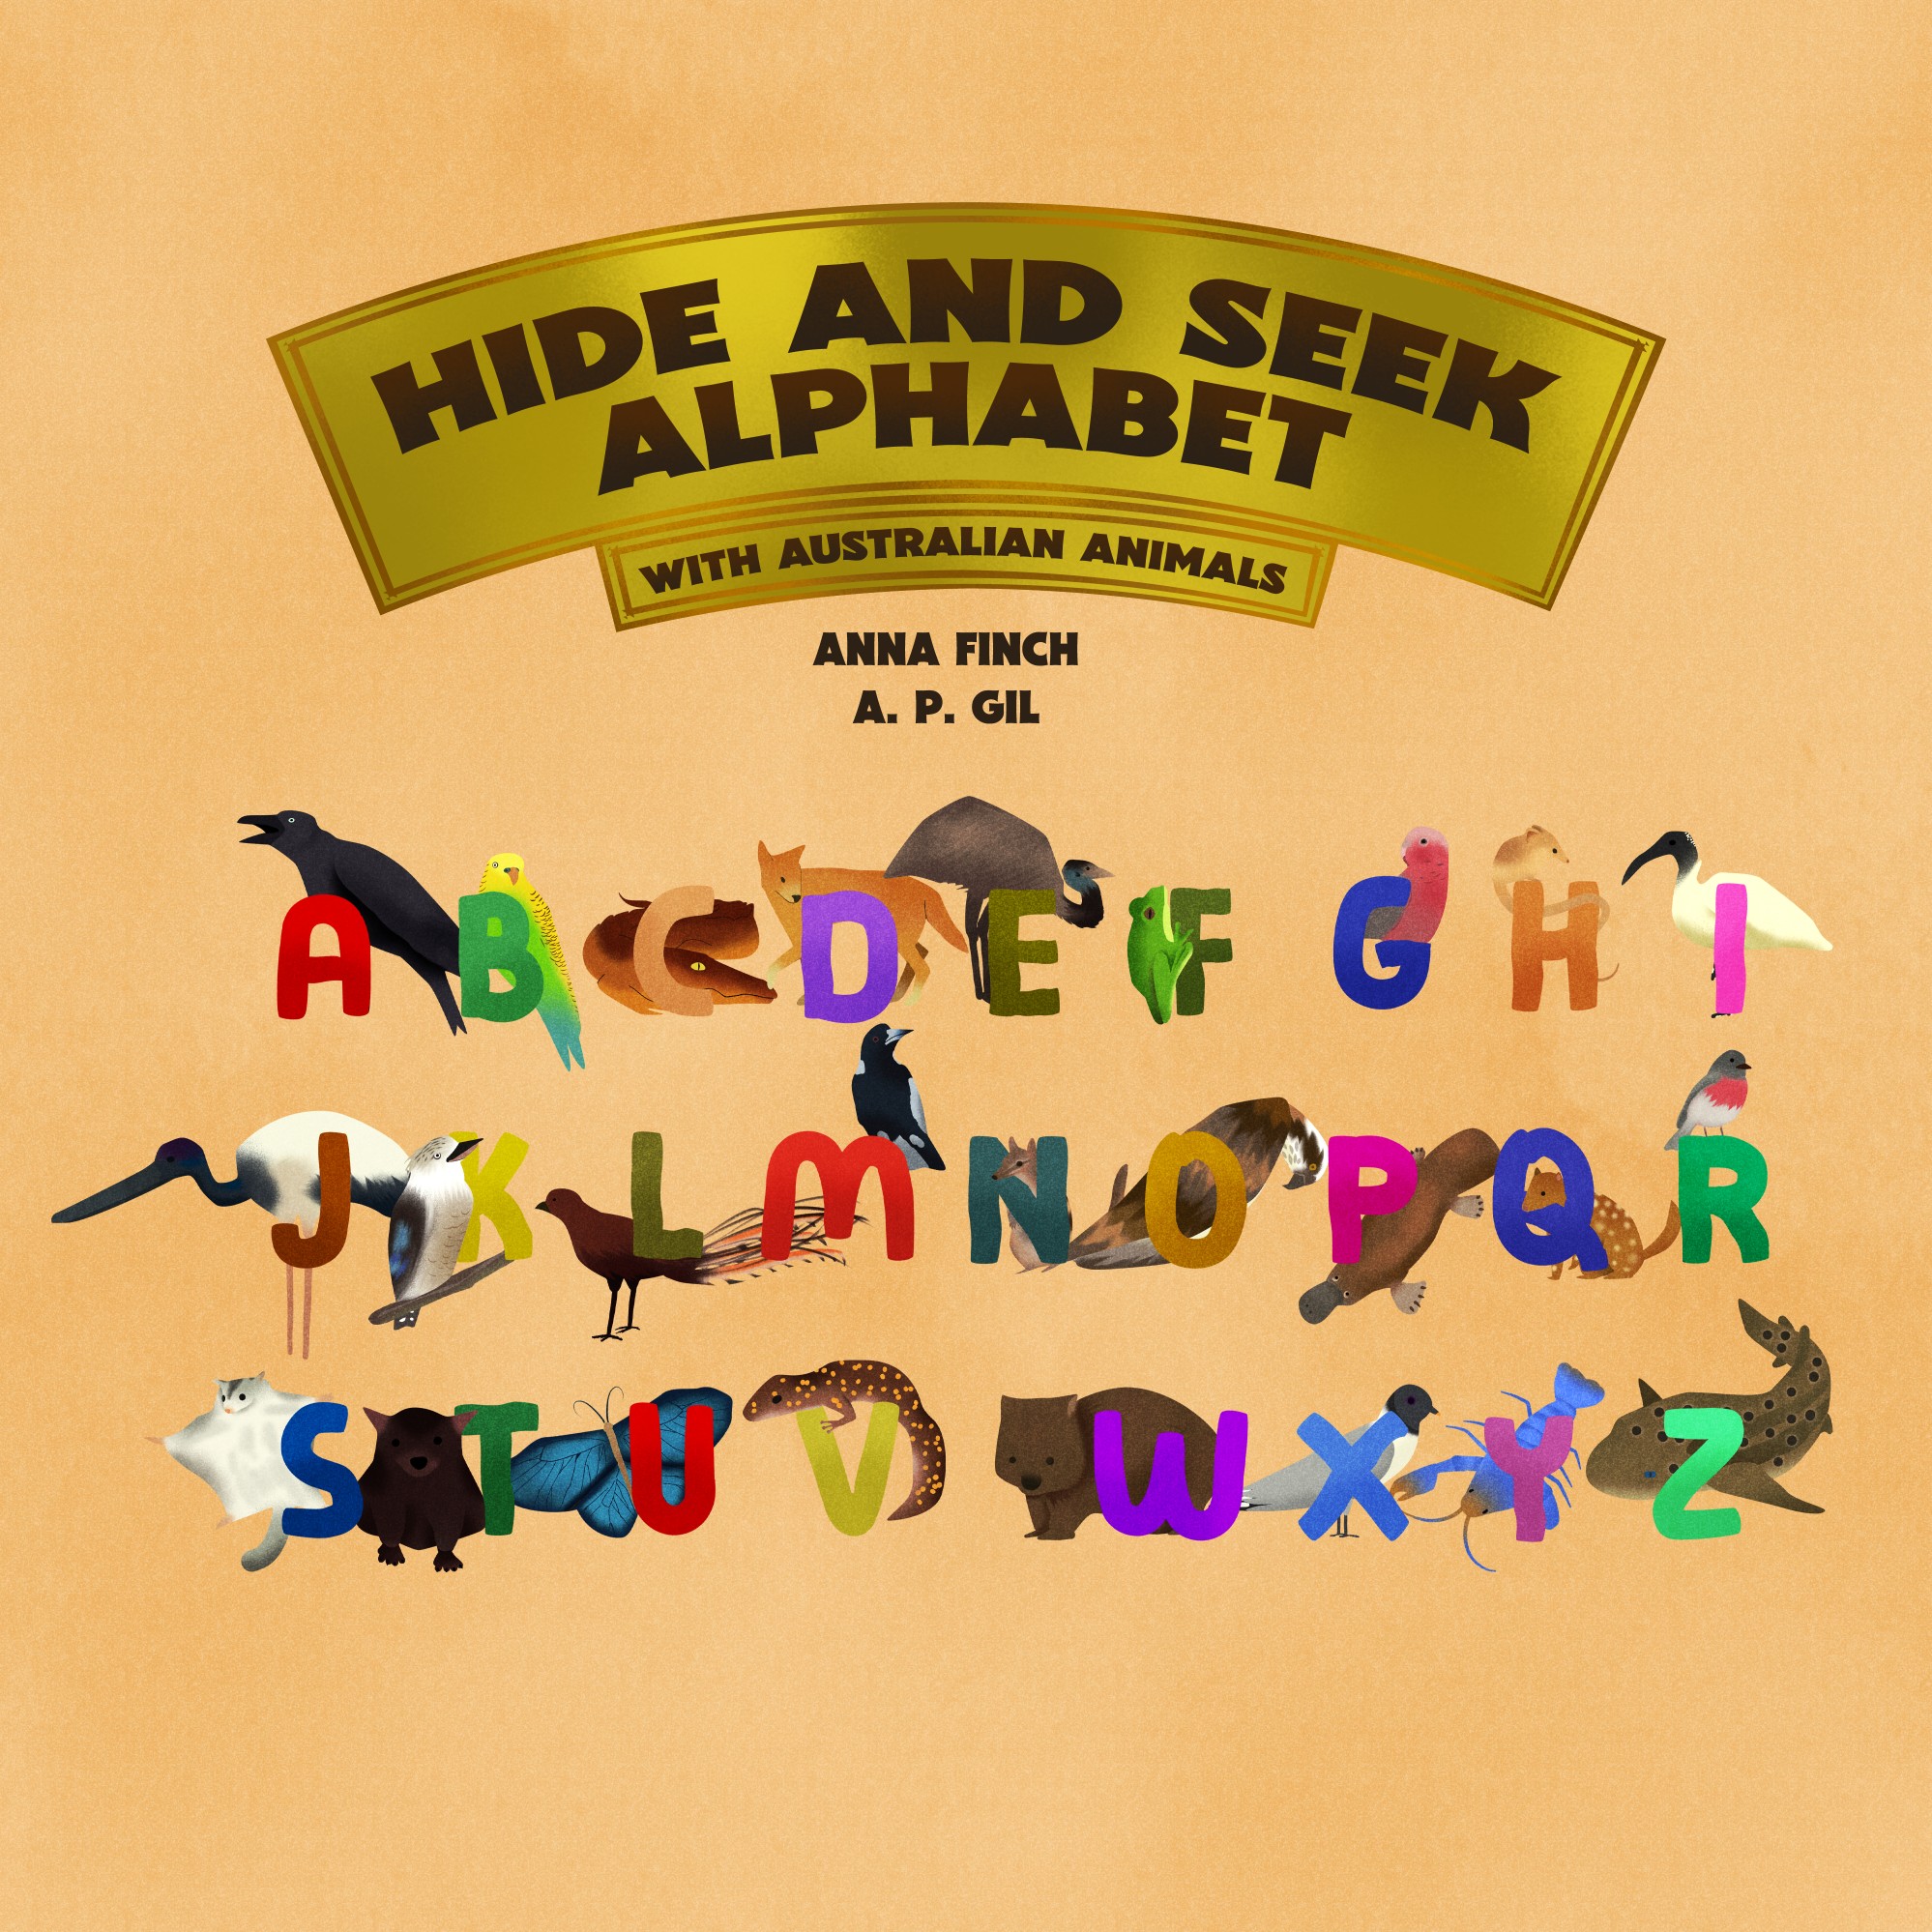 Hide and Seek Alphabet: With Australian Animals, A Picture Book Designed to Help Children Learn Alphabets in a Fun and Engaging Way